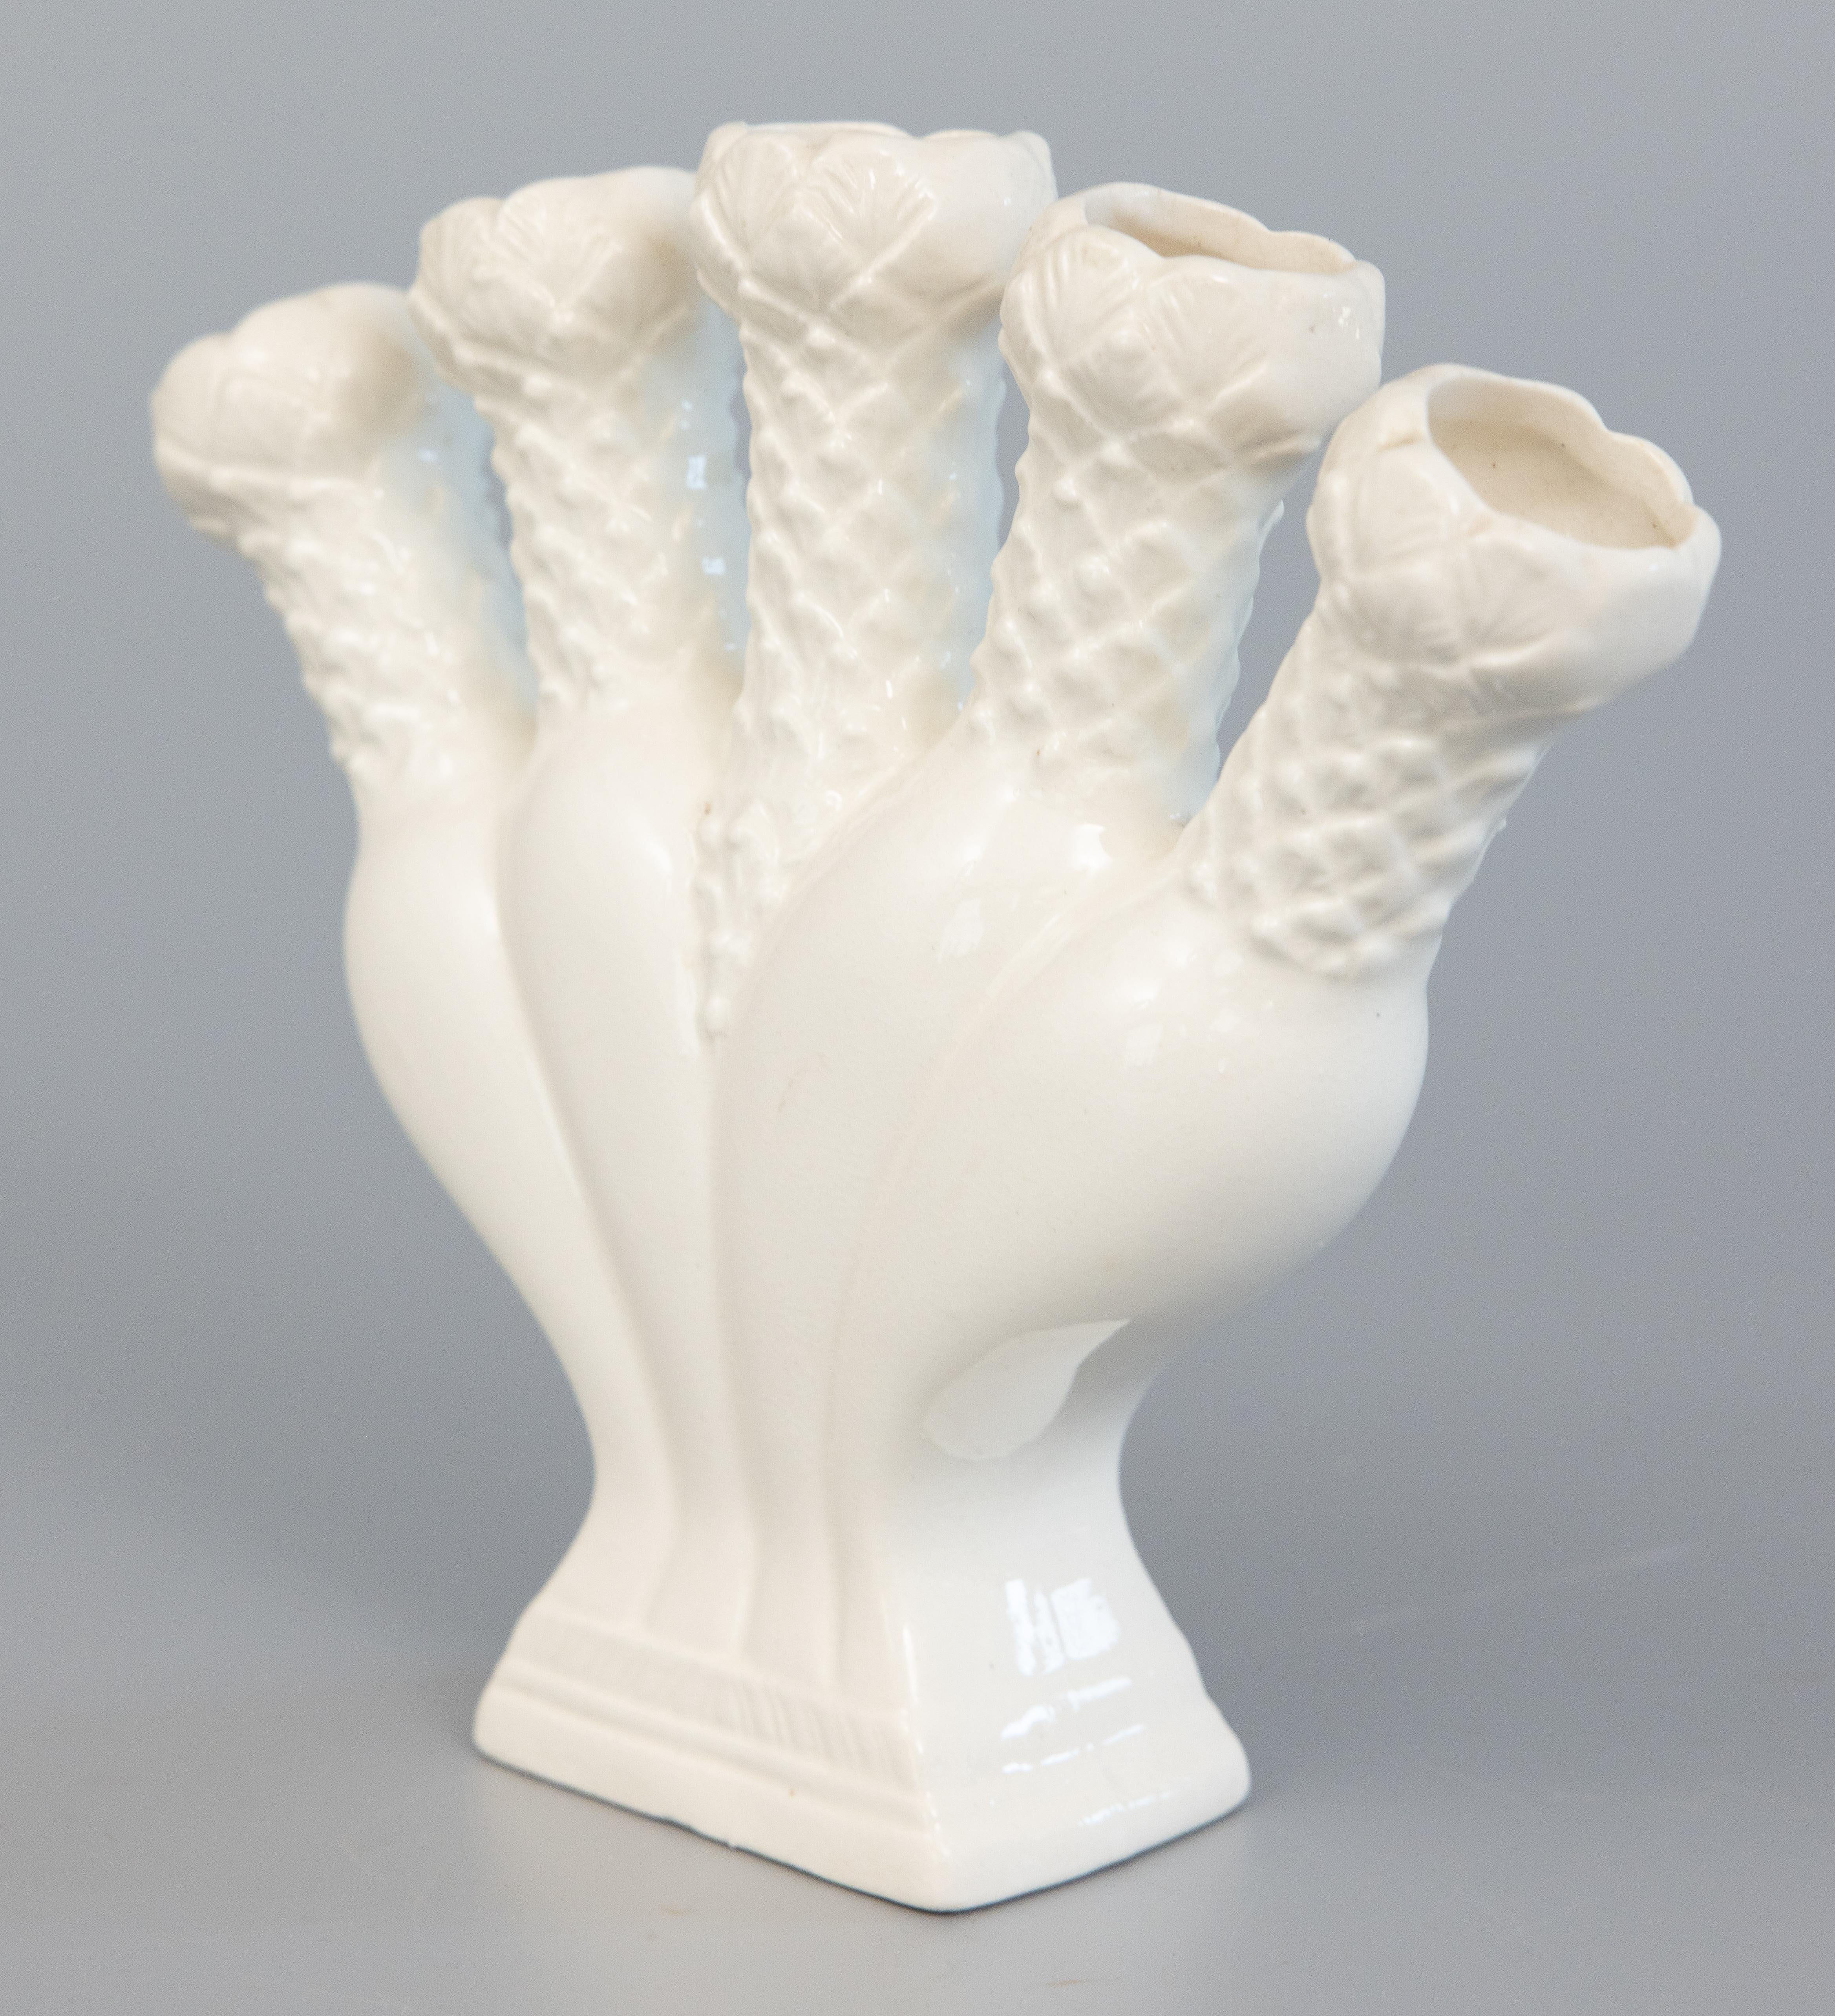 A lovely antique early 20th-century English creamware tulip vase. This superb tulipiere has five fingers molded with overlapping leaves and would be beautiful displayed with flowers or on its own.